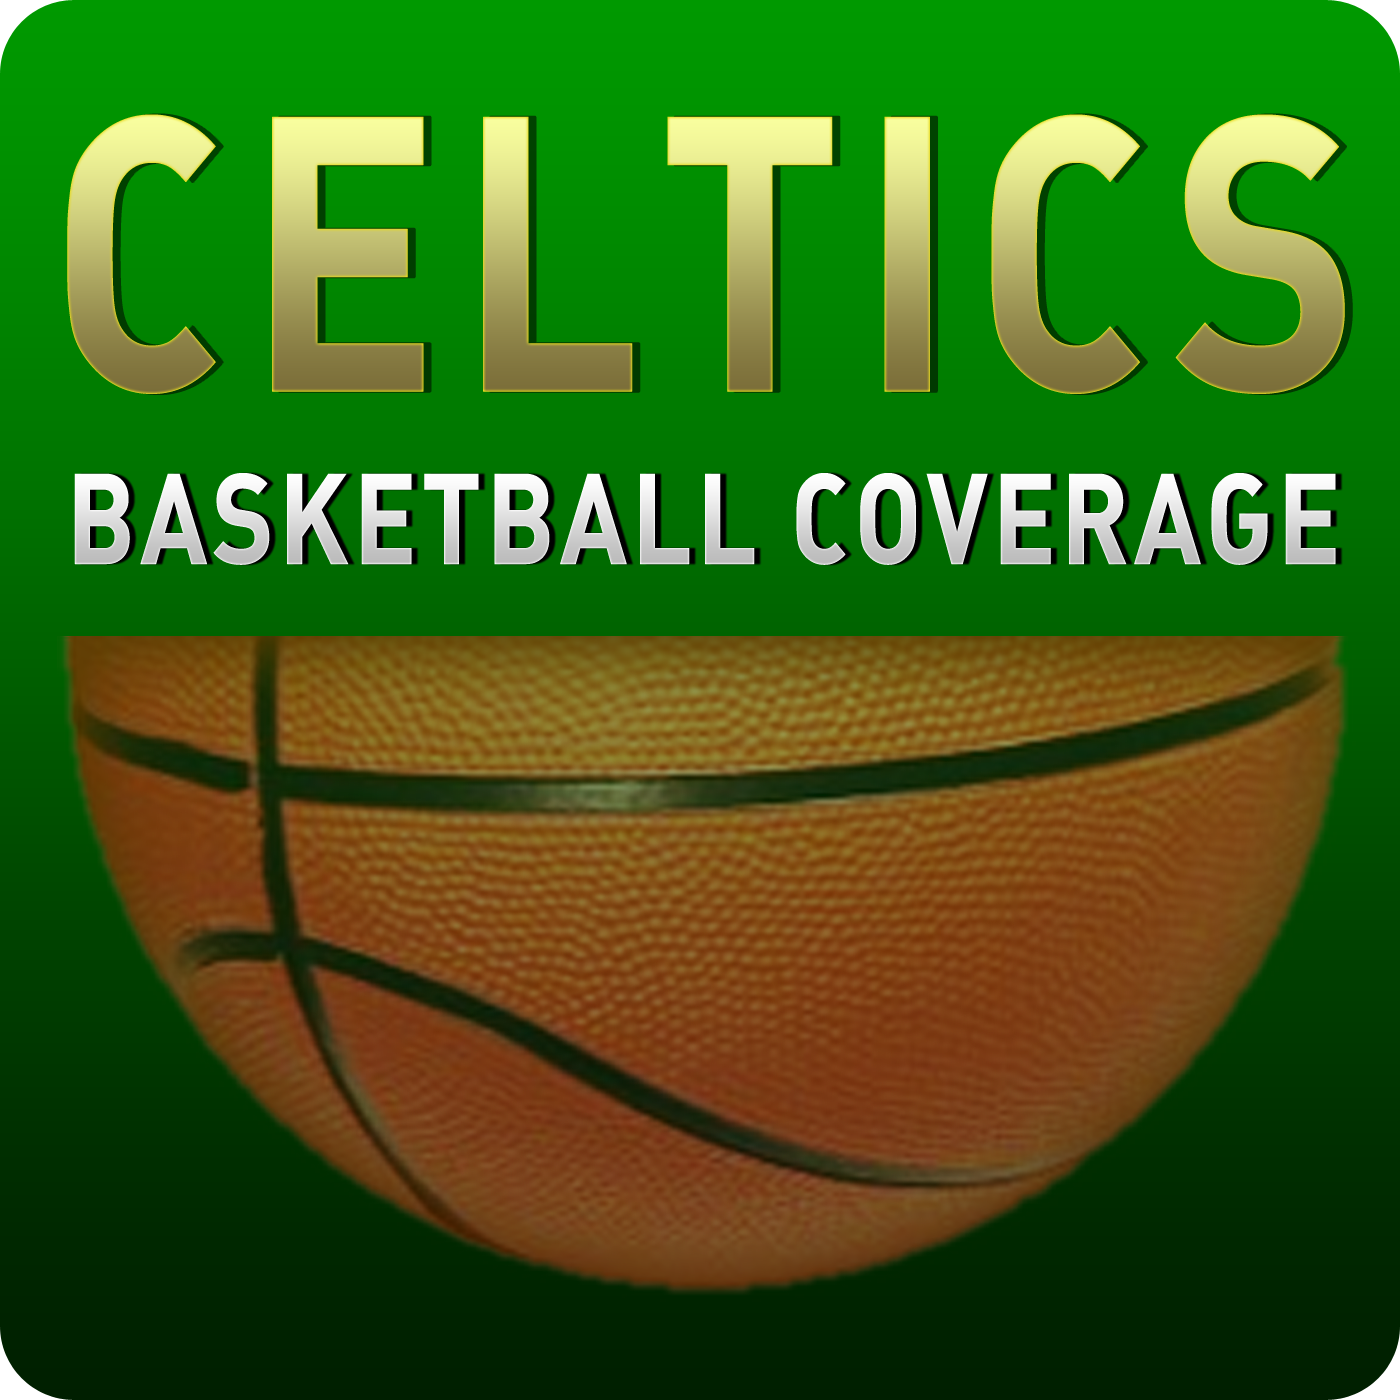 The Boston Globe's Gary Washburn on how the Celtics matchup with the Pacers